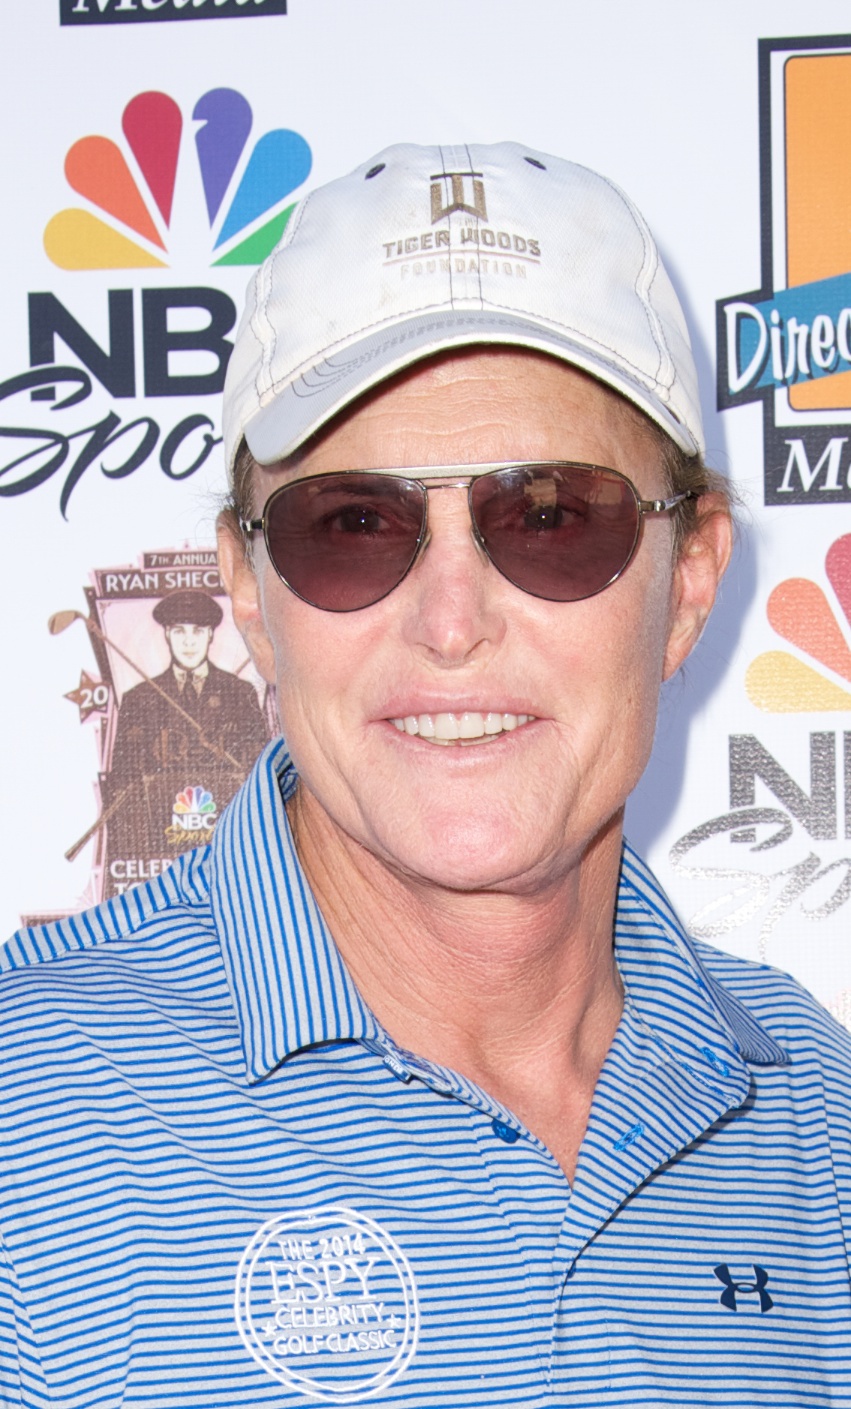 Bruce Jenner attends Ryan Sheckler's 7th Annual Celebrity Golf Tournament at Trump National Golf Club on September 29, 2014 in Rancho Palos Verdes, California. (Earl Gibson III&mdash;WireImage/Getty Images)